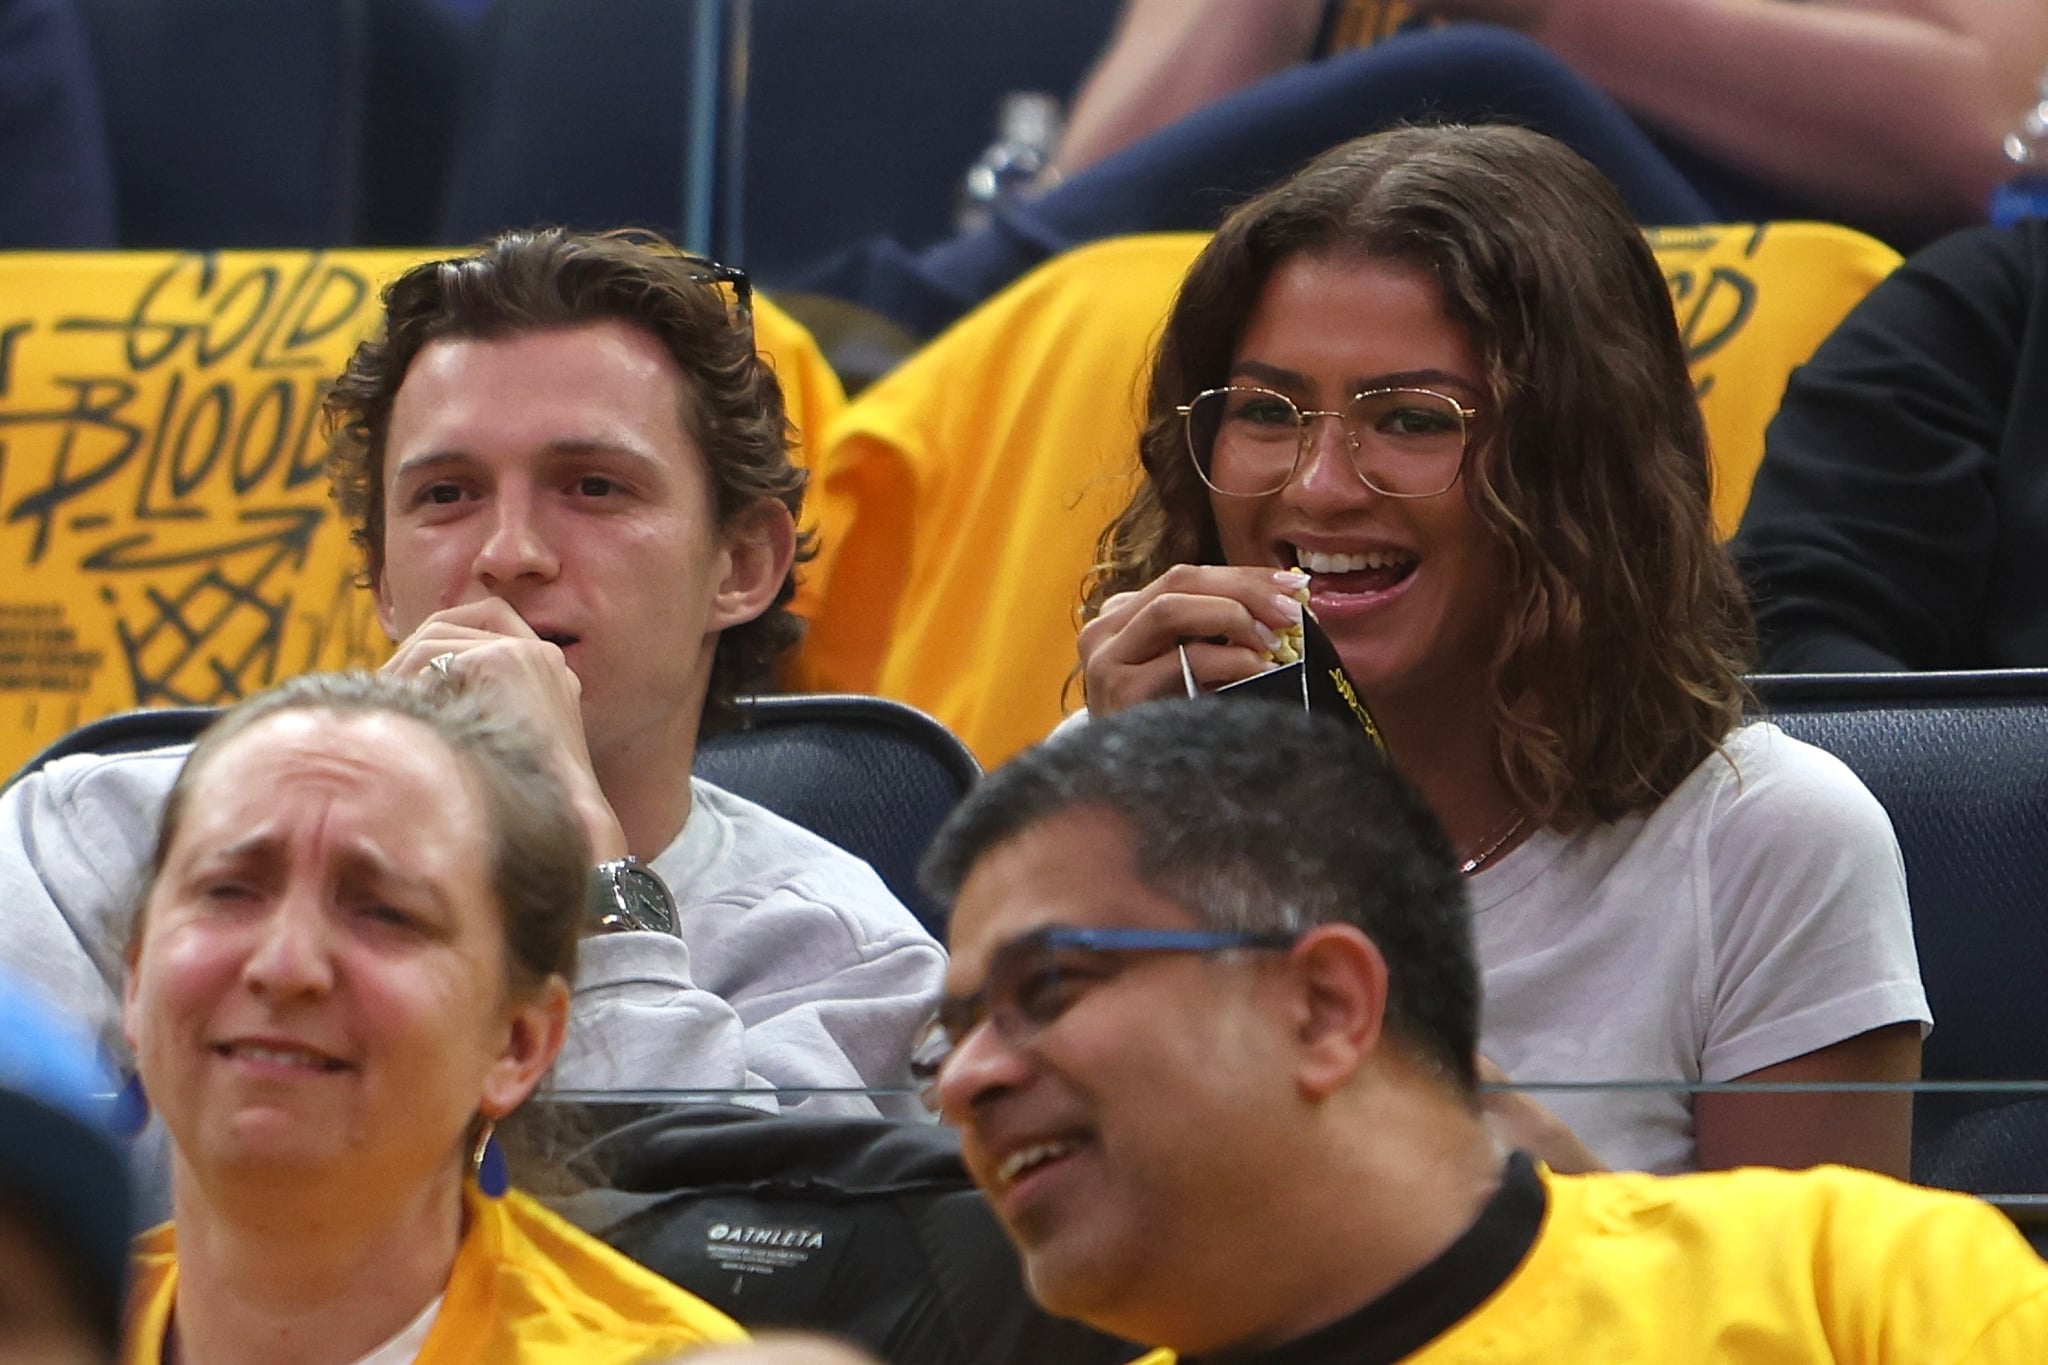 SAN FRANCISCO, CA - May 4: Tom Holland and Zendaya takes in the game between the Los Angeles Lakers and Golden State Warriors during Game 2 of the 2023 NBA Playoffs Western Conference Semifinals on May 4, 2023 at Chase Centre in San Francisco, California. NOTE TO USER: User expressly acknowledges and agrees that, by downloading and/or using this Photograph, user is consenting to the terms and conditions of the Getty Images Licence Agreement. Mandatory Copyright Notice: Copyright 2023 NBAE (Photo by Jim Poorten/NBAE via Getty Images)